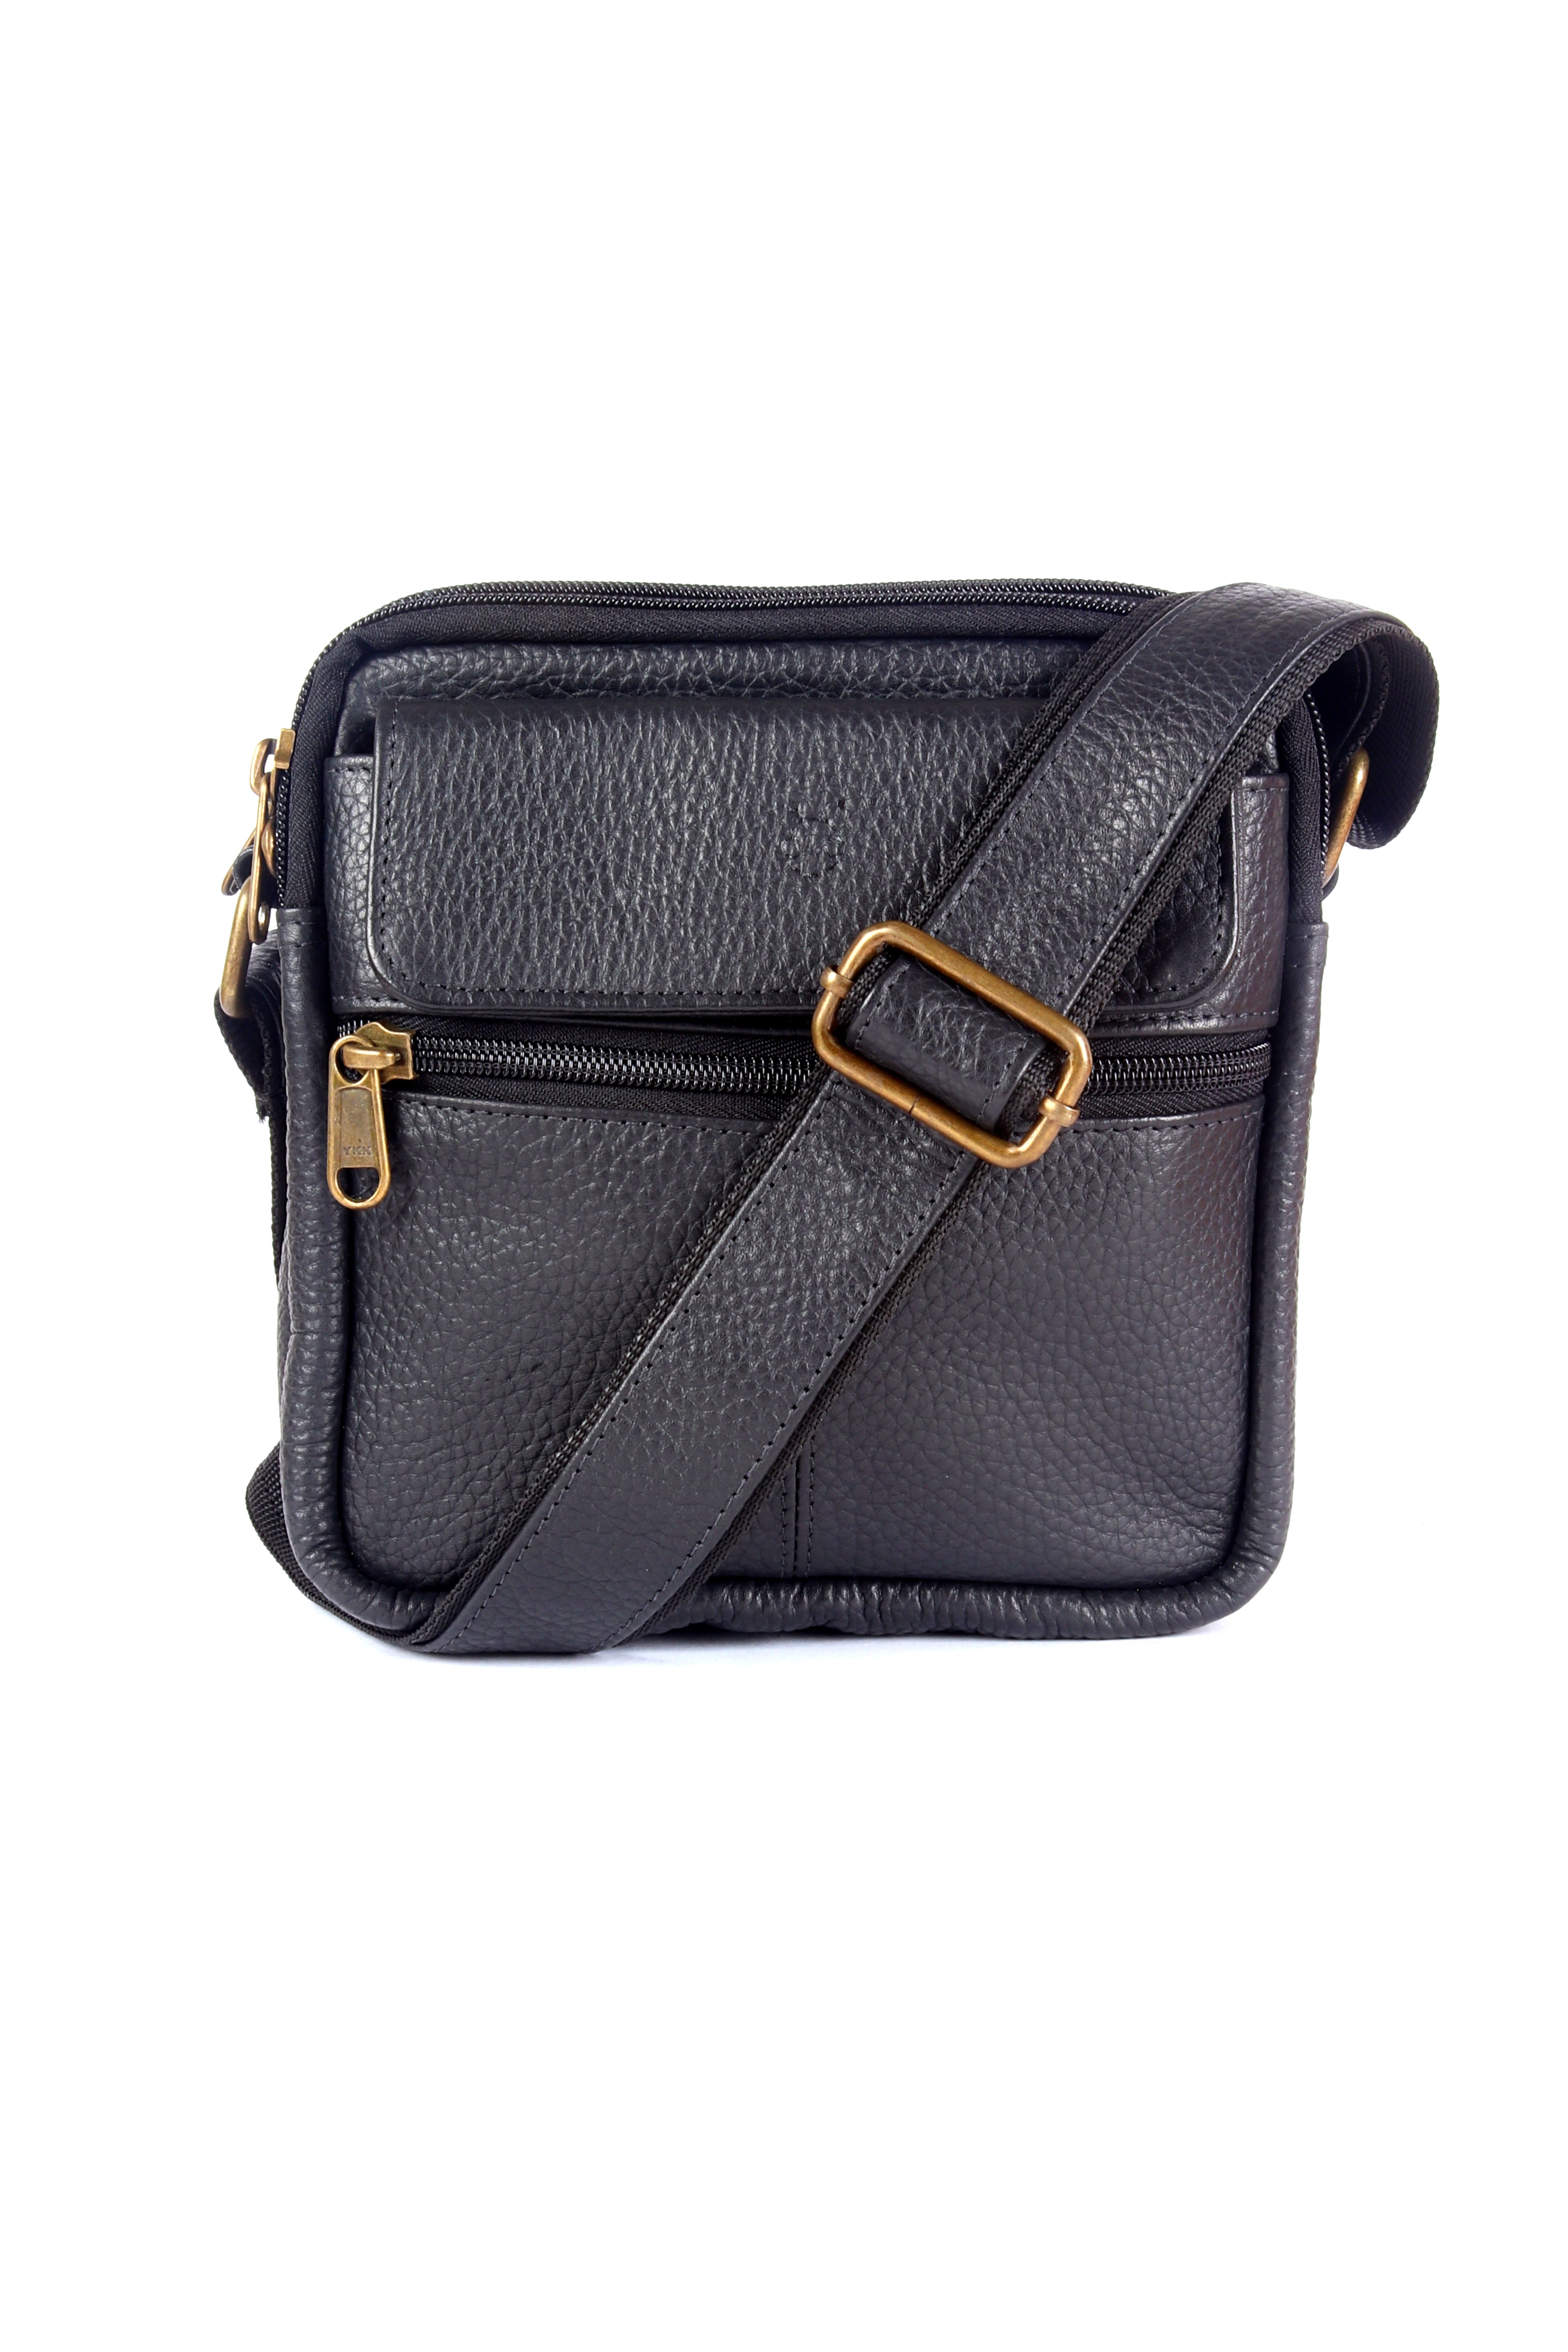 Amazon.com: Leather Sling Bag For Women